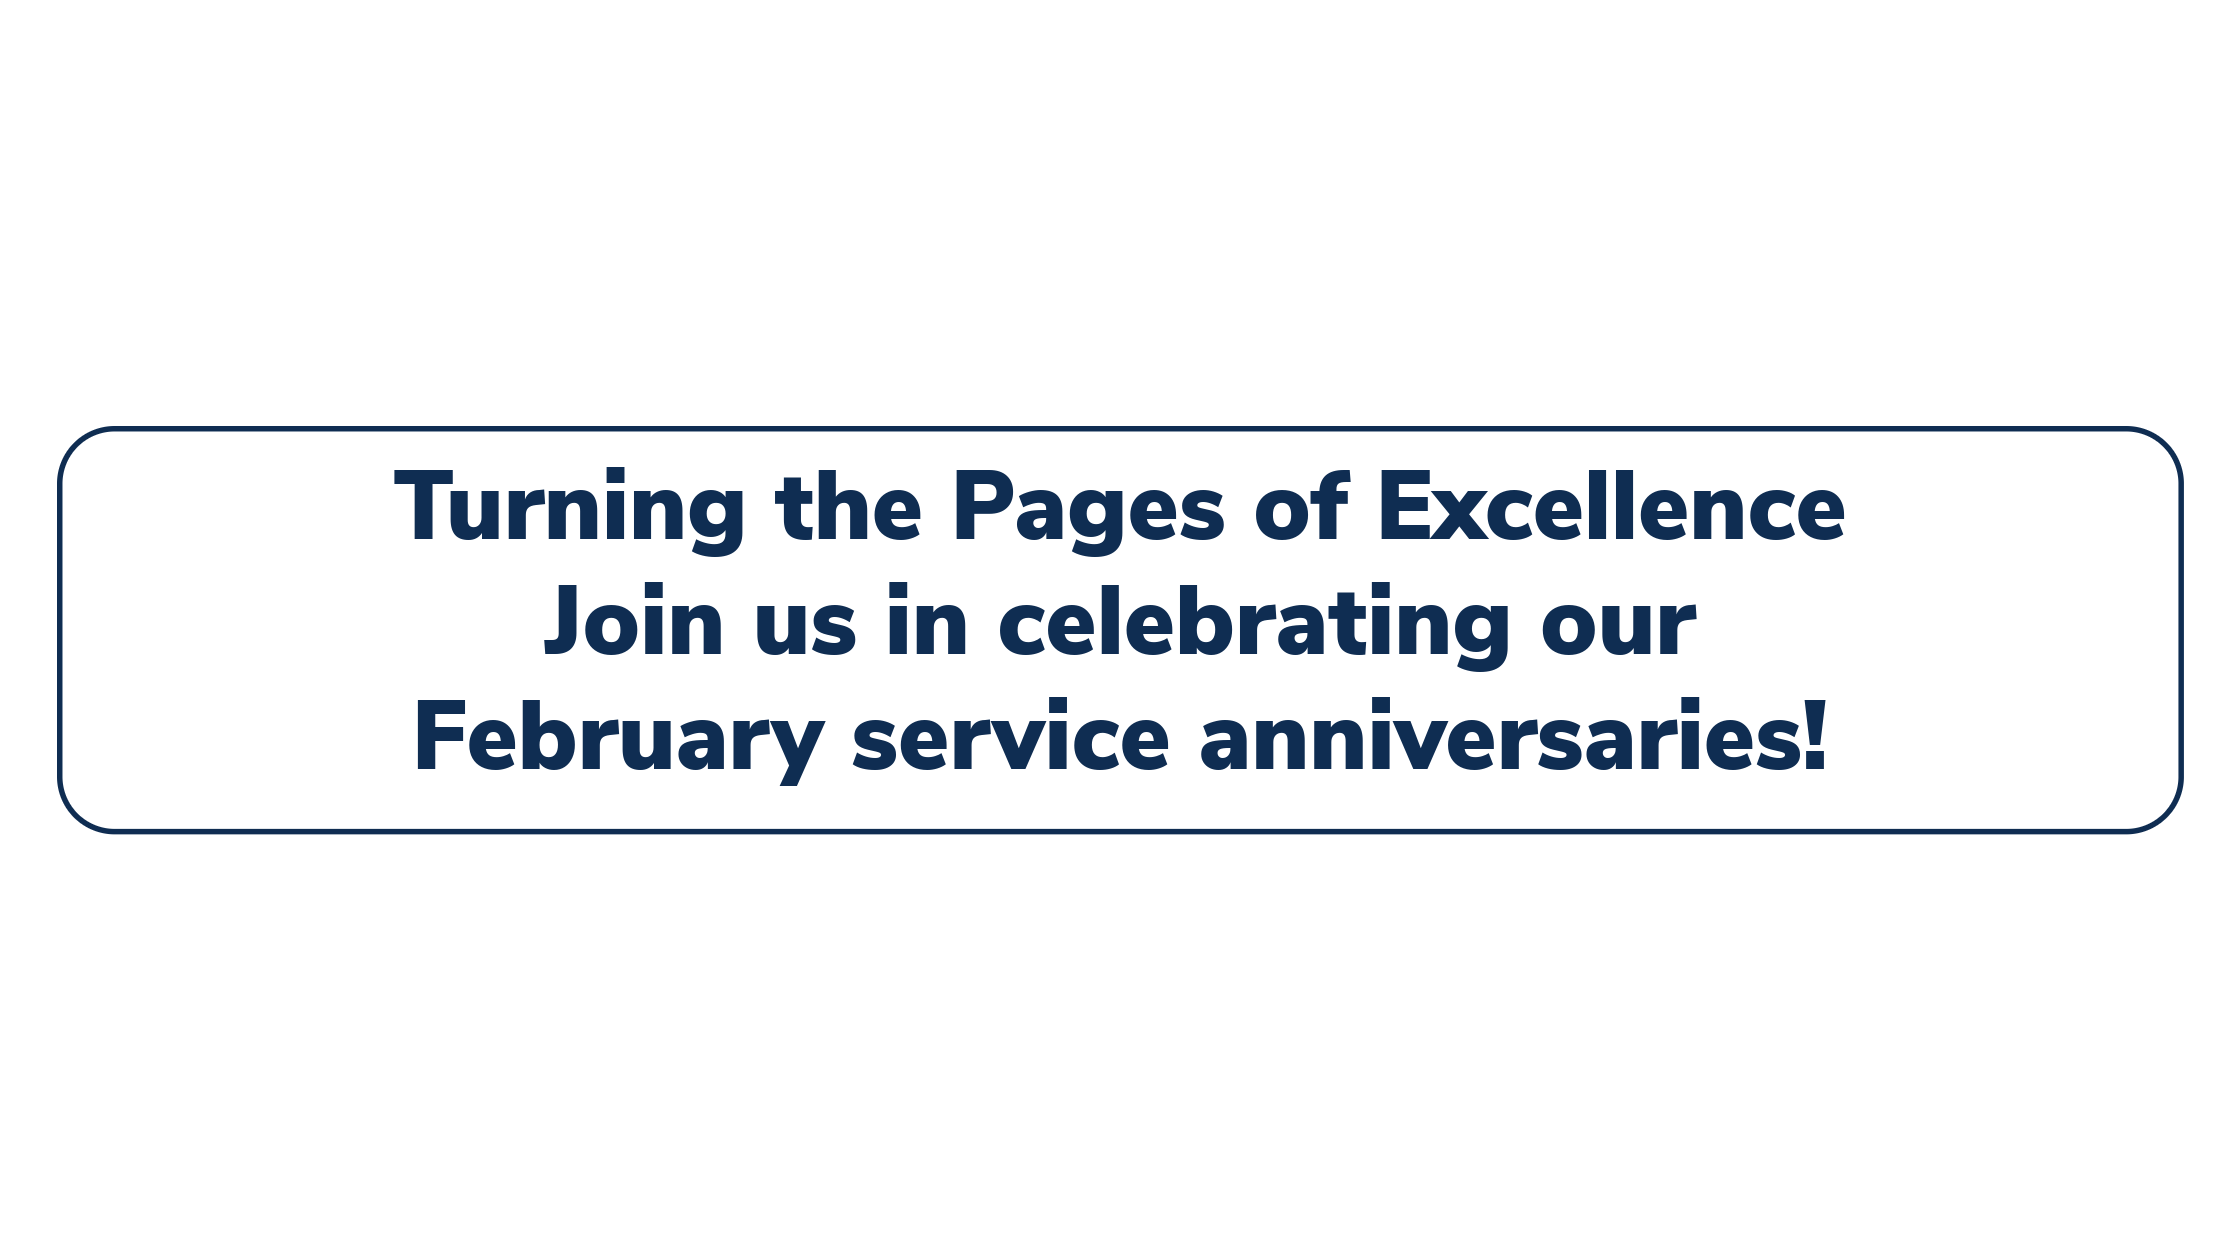 Turning the Pages of Excellence: February Service Anniversaries